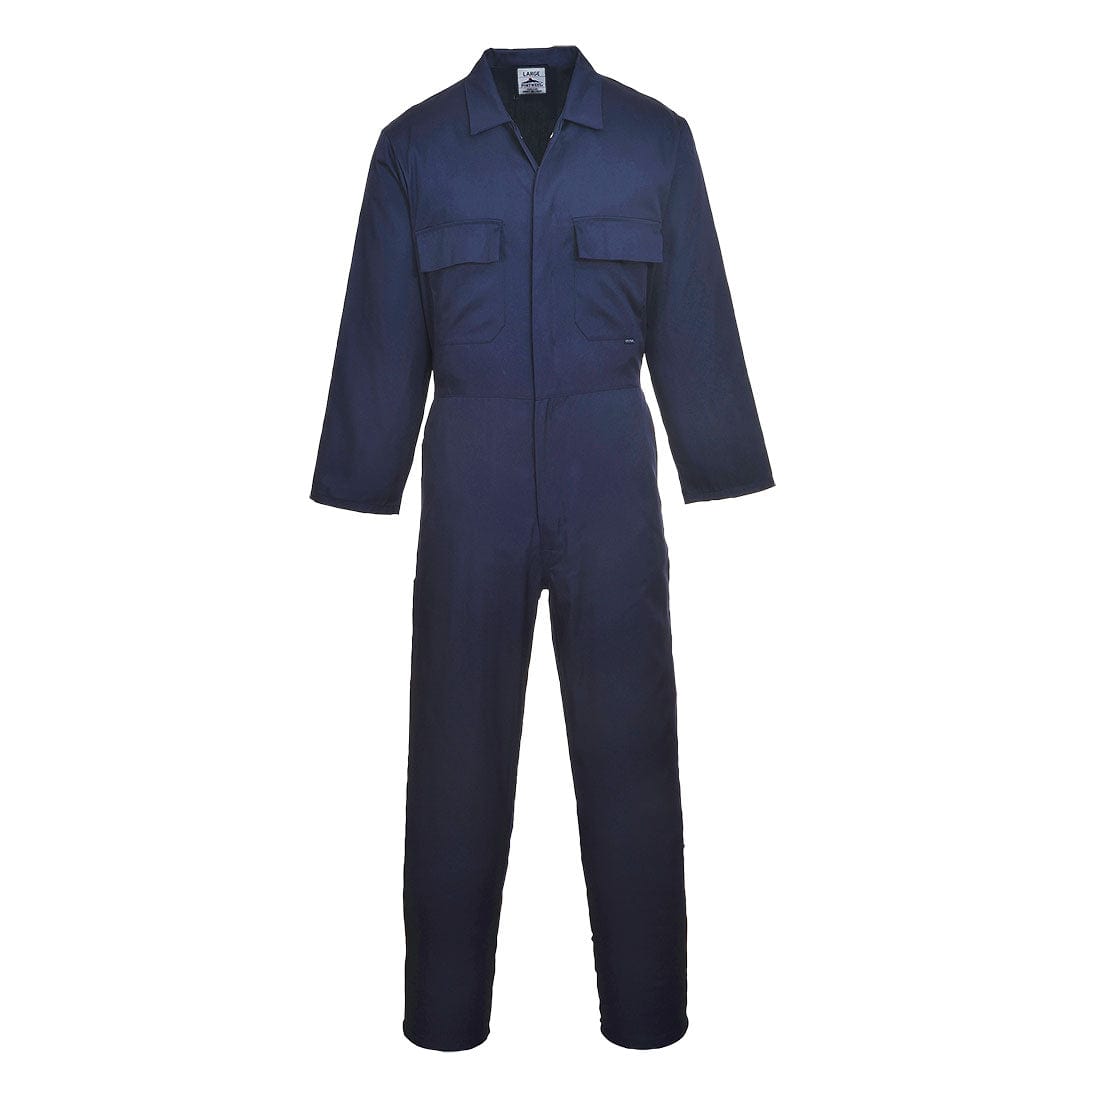 Navy Blue Complete Work Wear Coverall With Belt | Durable & Lightweight | Supply Master Ghana, Accra Safety Clothing Buy Tools hardware Building materials